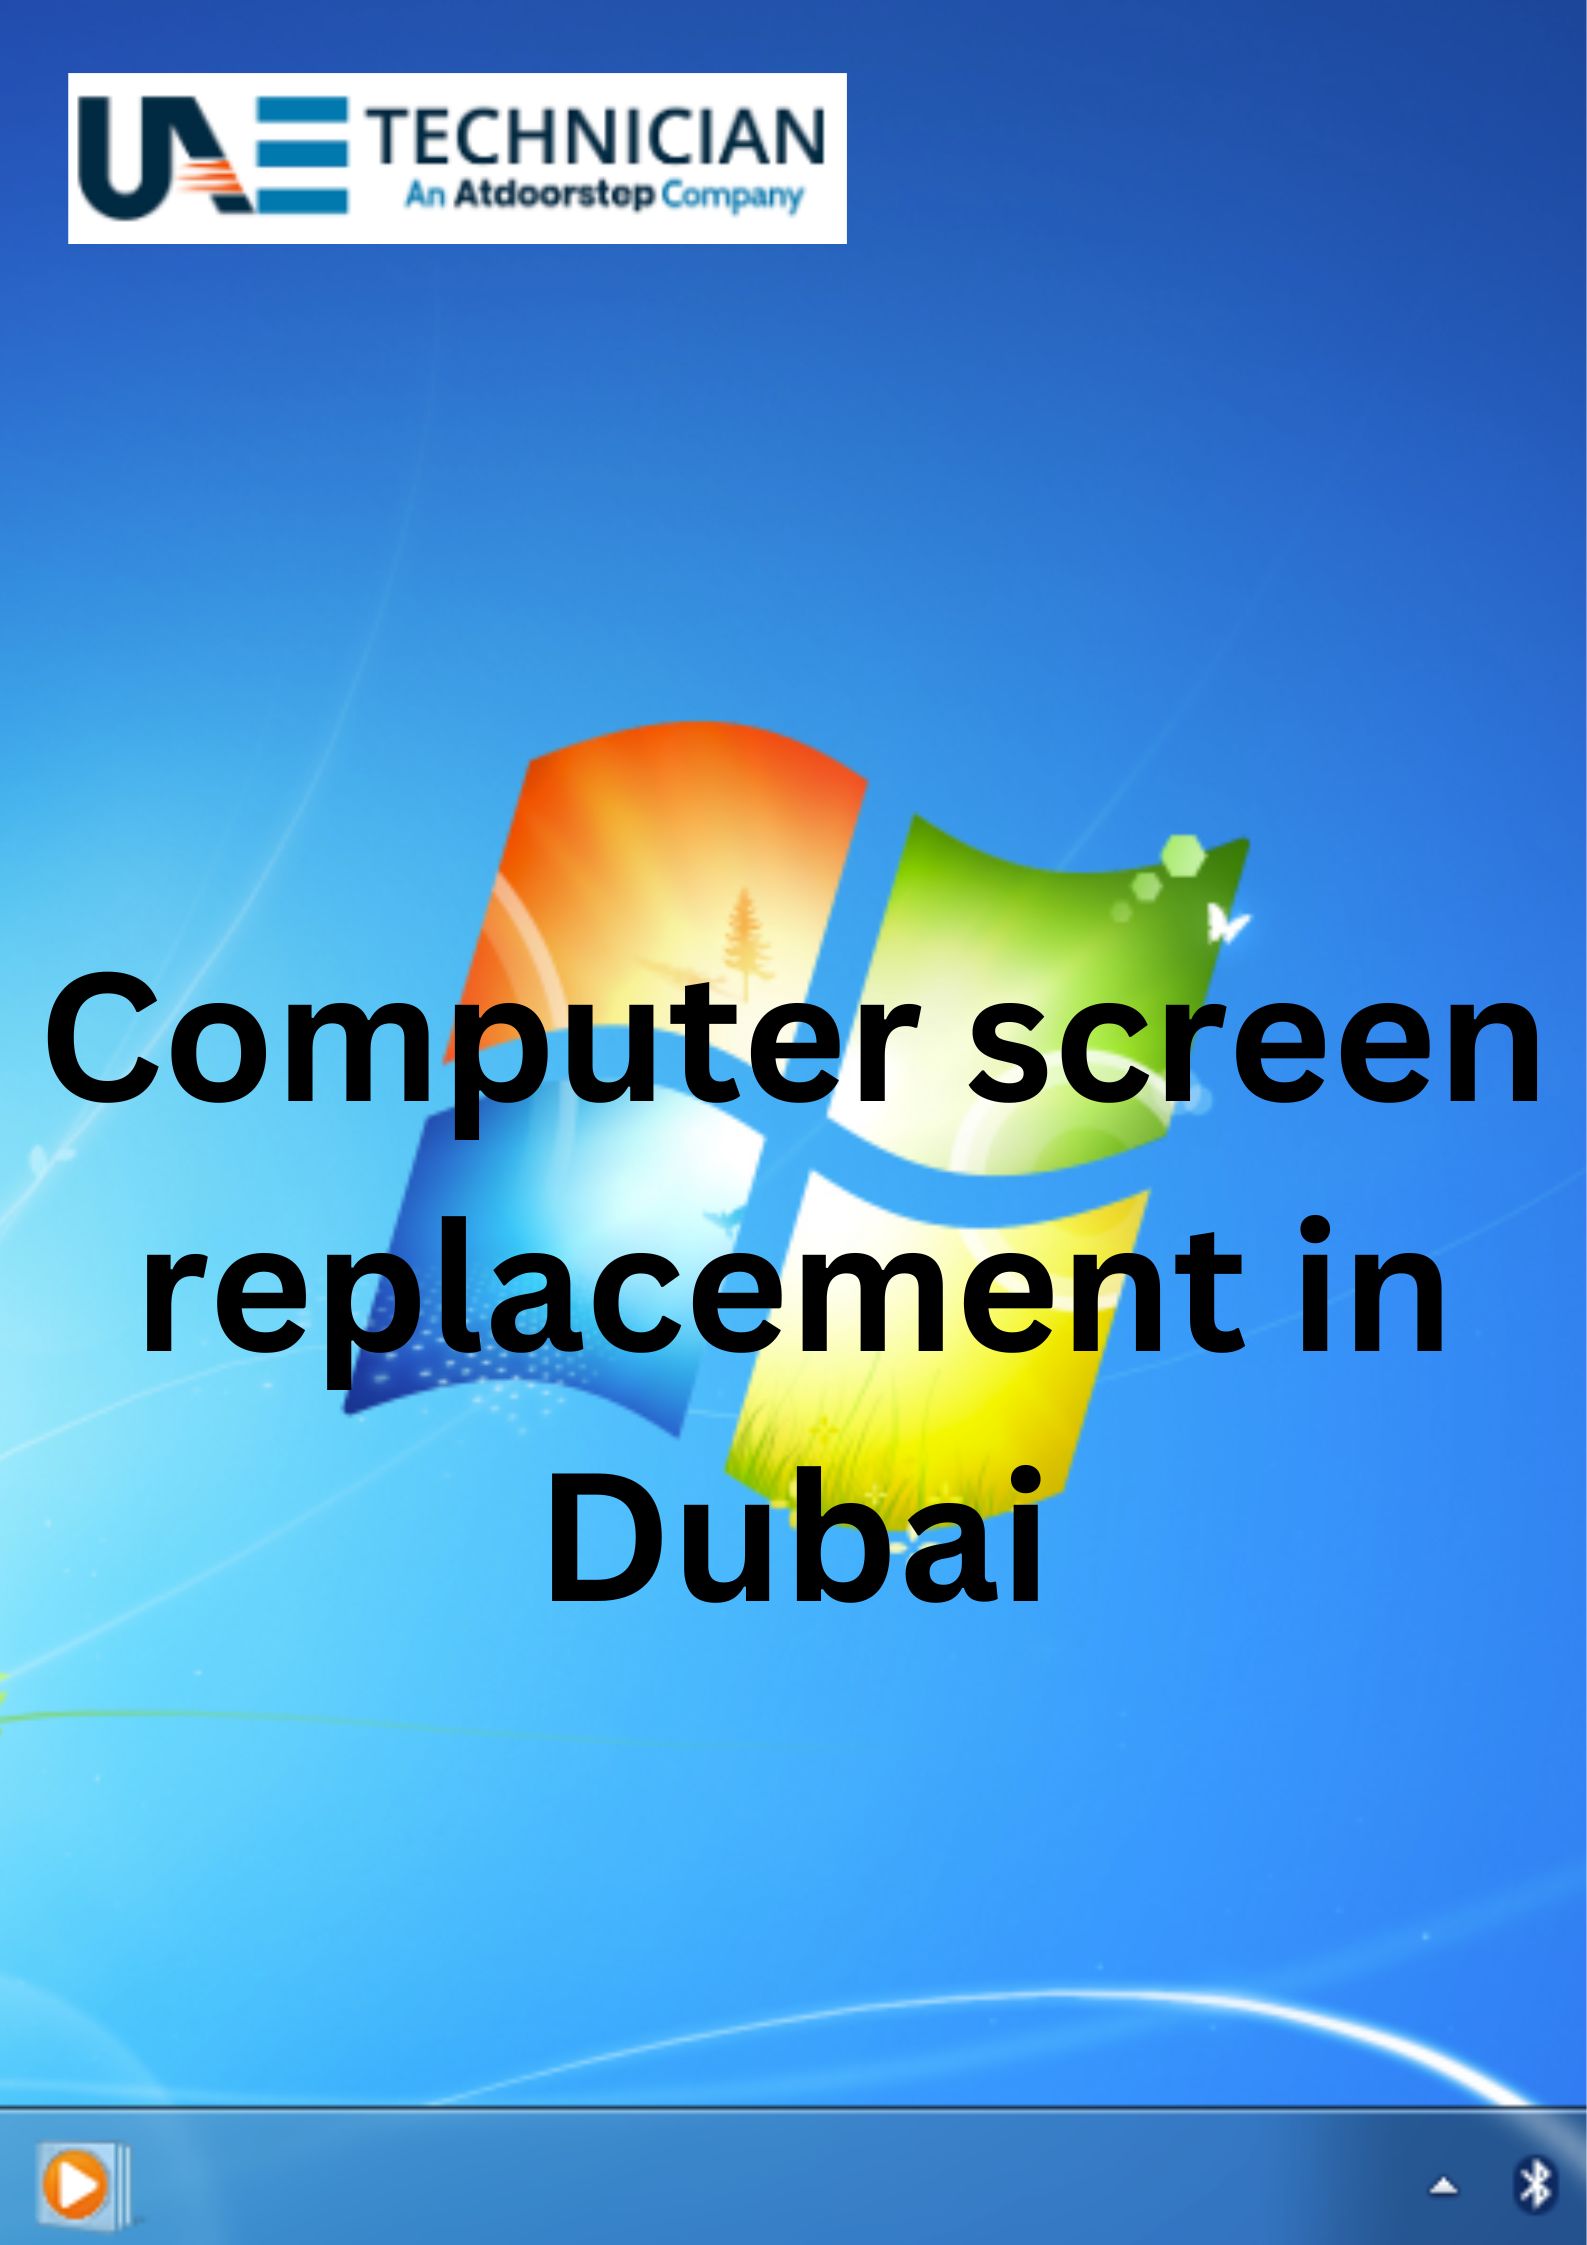 What is the least repaired computer repair in Dubai?